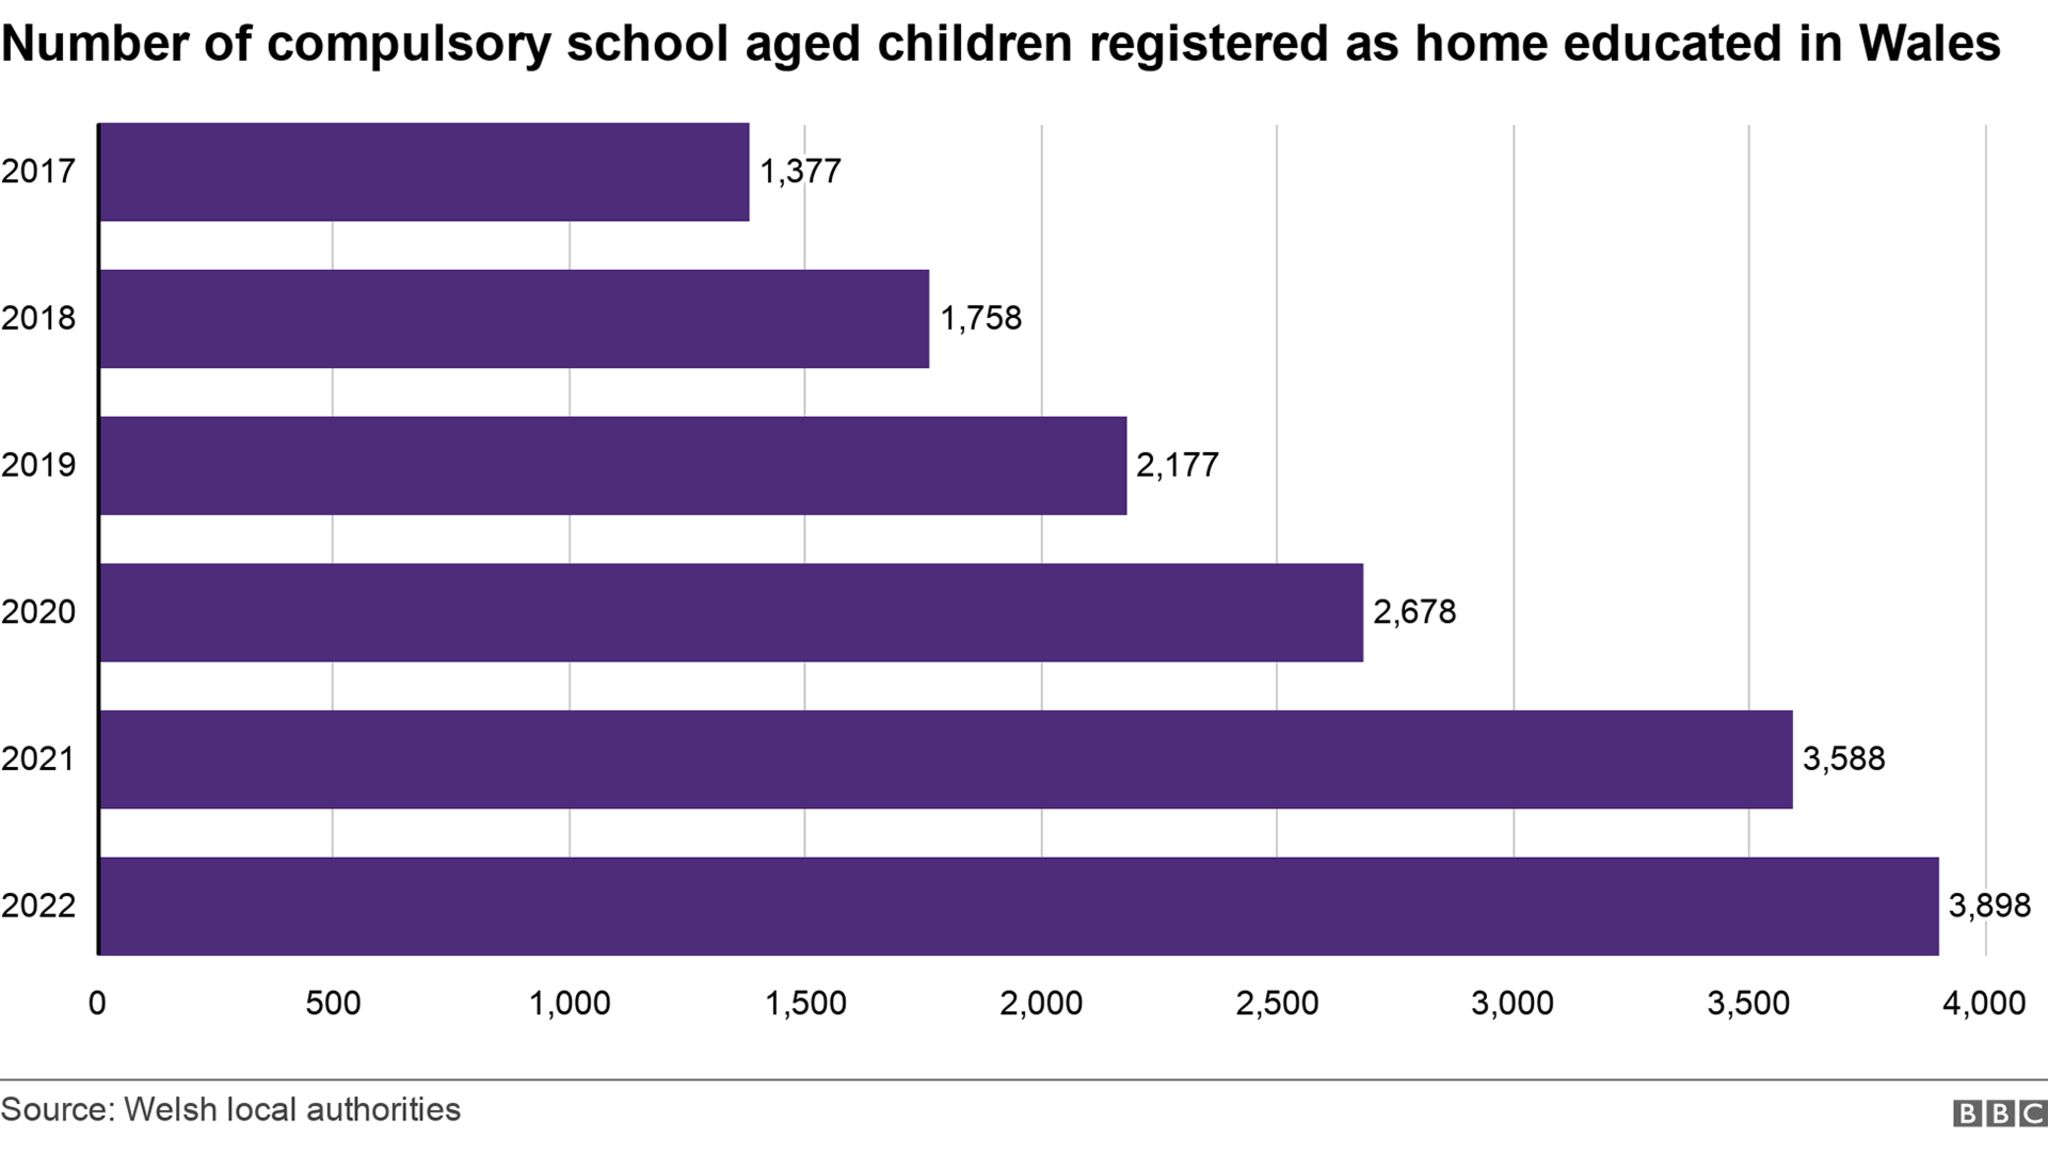 Number of compulsory school aged children registered as home educated in Wales